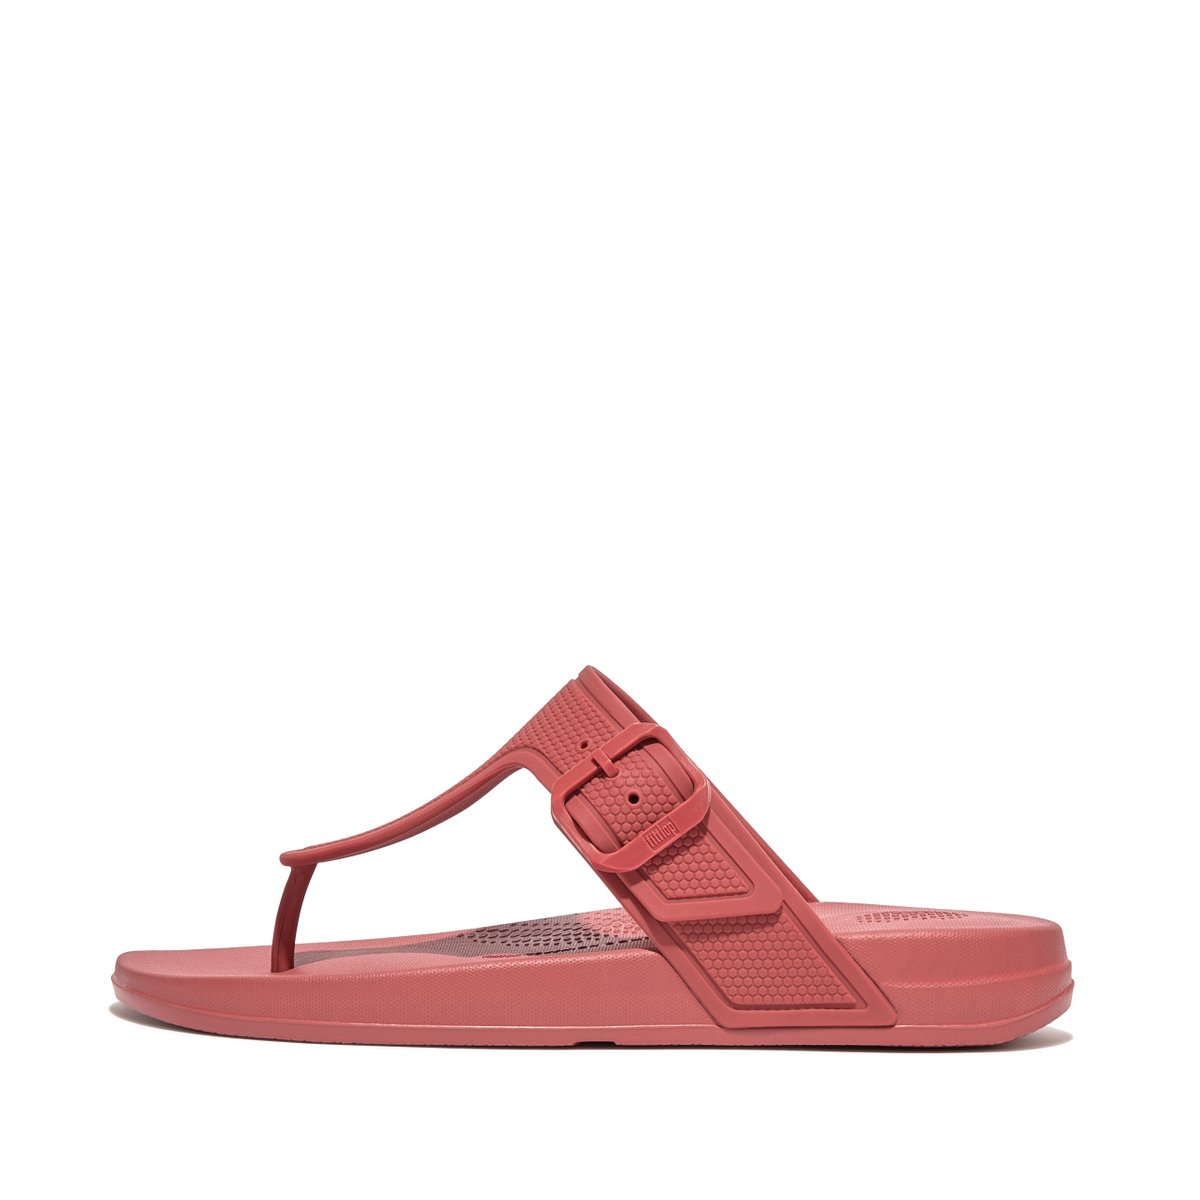 iQUSHION Adjustable Buckle Flip-Flops - Dusky Red (GB3-A70)